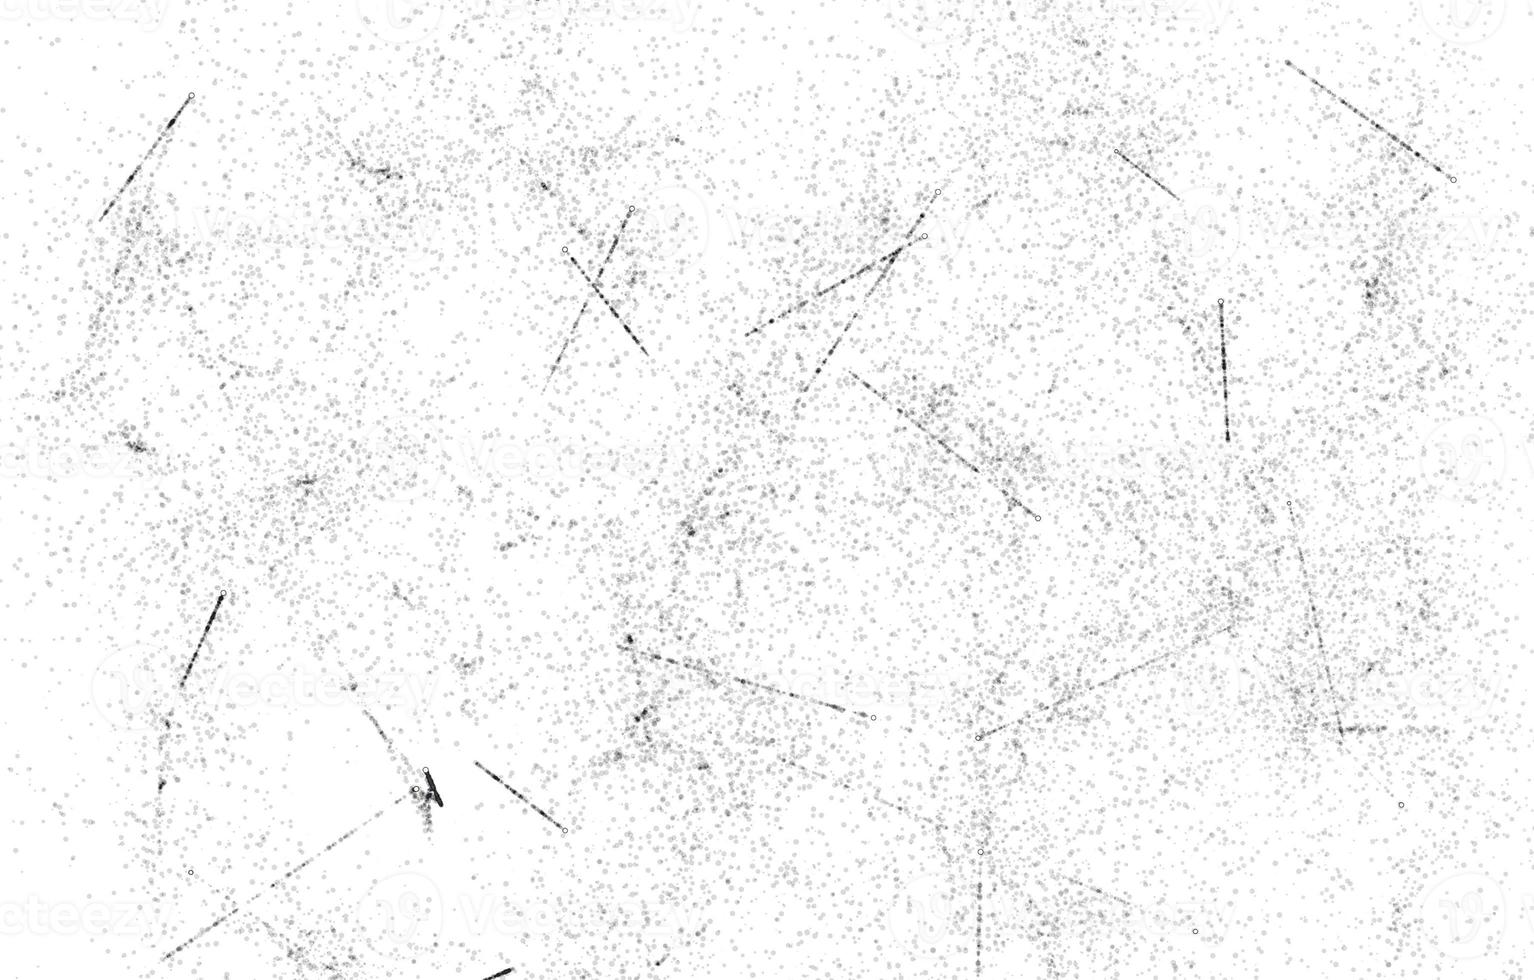 Scratch Grunge Urban Background.Grunge Black and White Distress Texture.Grunge rough dirty background.For posters, banners, retro and urban designs. photo